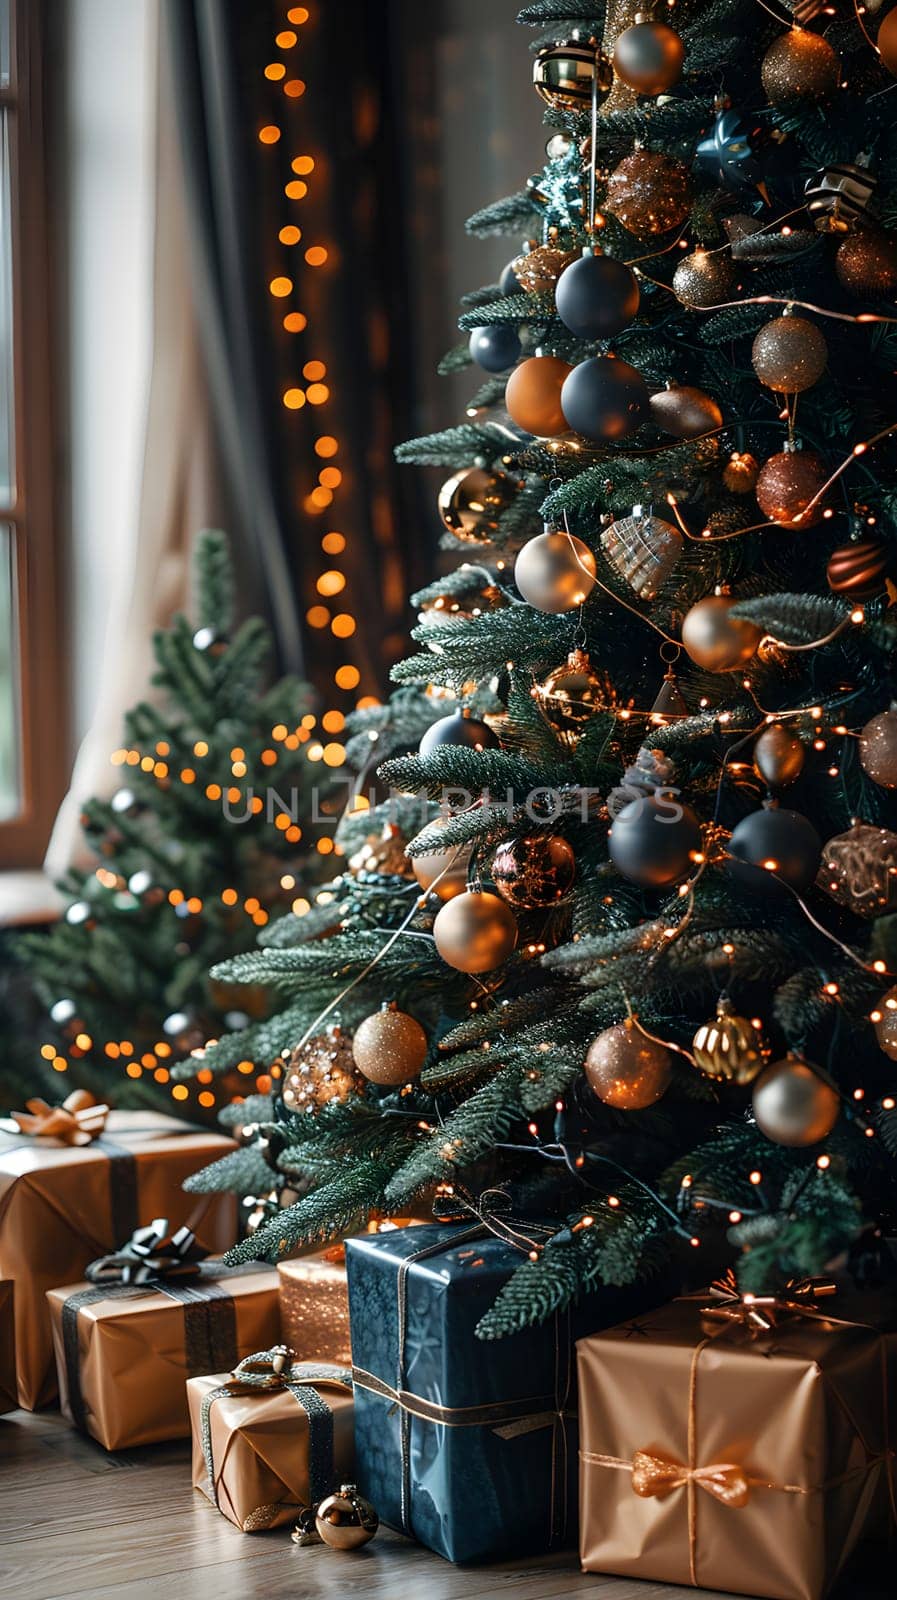 A beautifully decorated Christmas tree adorned with ornaments and lights, standing tall in a cozy living room with presents neatly arranged underneath